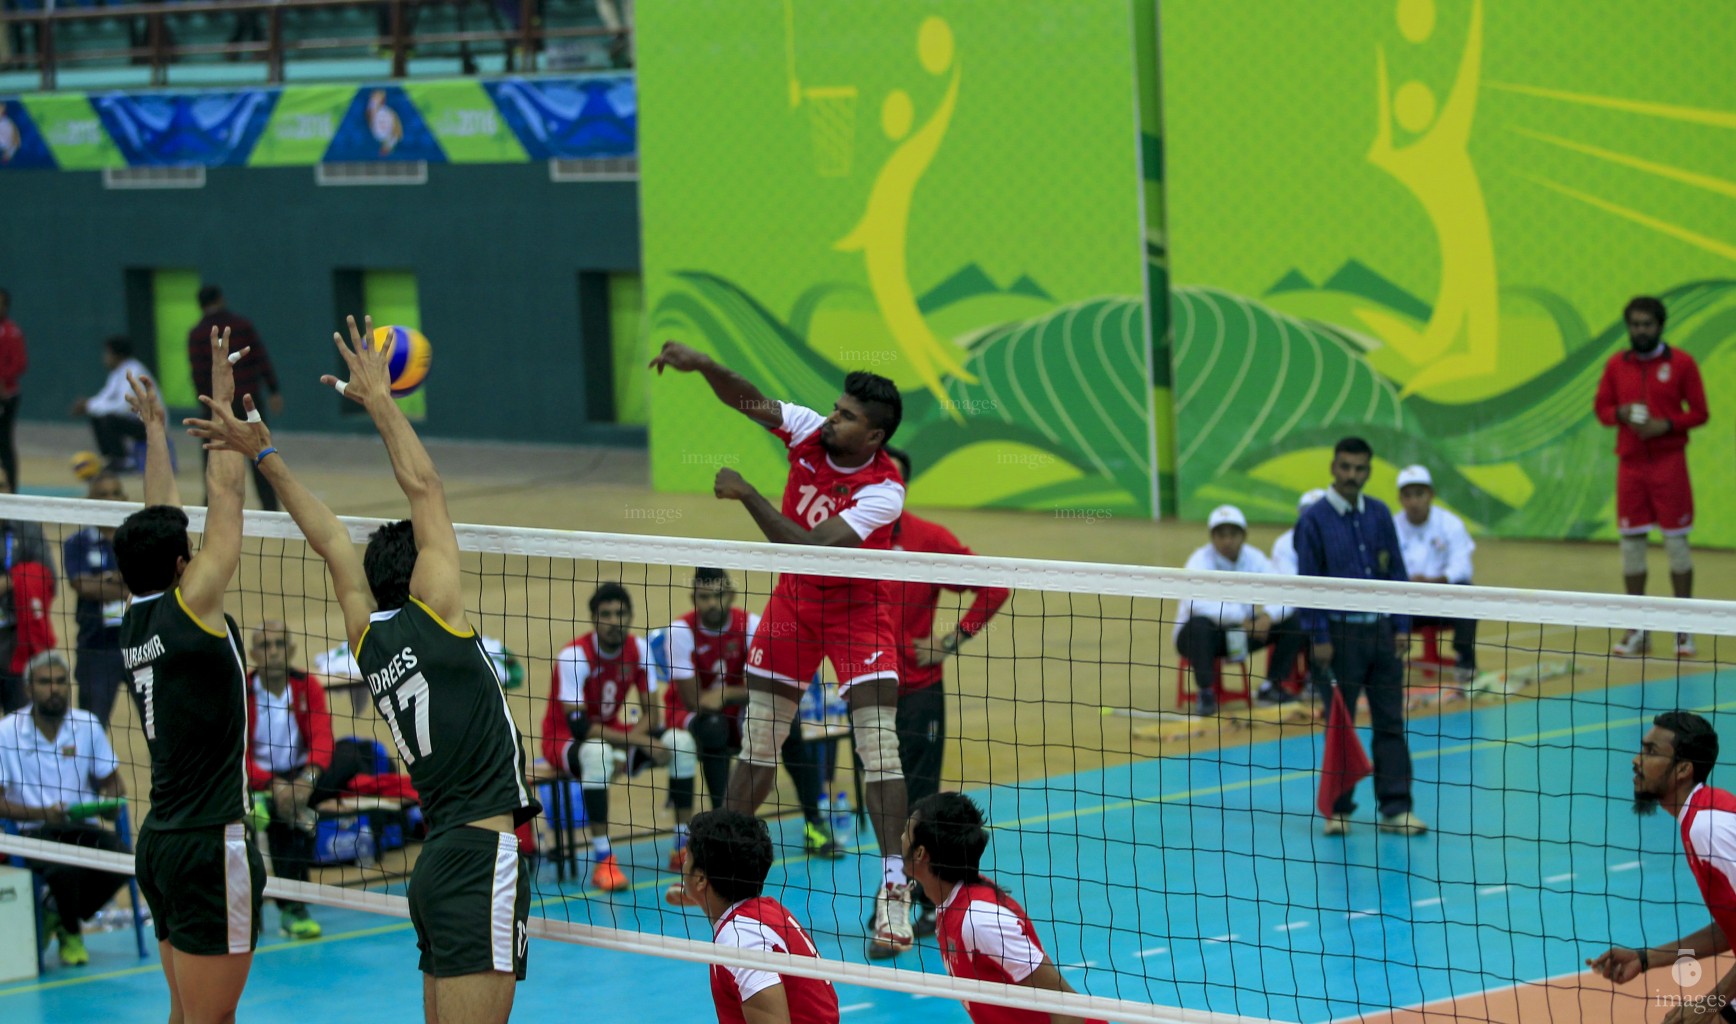 Maldives vs Pakistan in the volleyball event of the South Asian Games in Guwahati, India, Friday, February 5, 2016. (Images.mv Photo: Mohamed Ahsan)